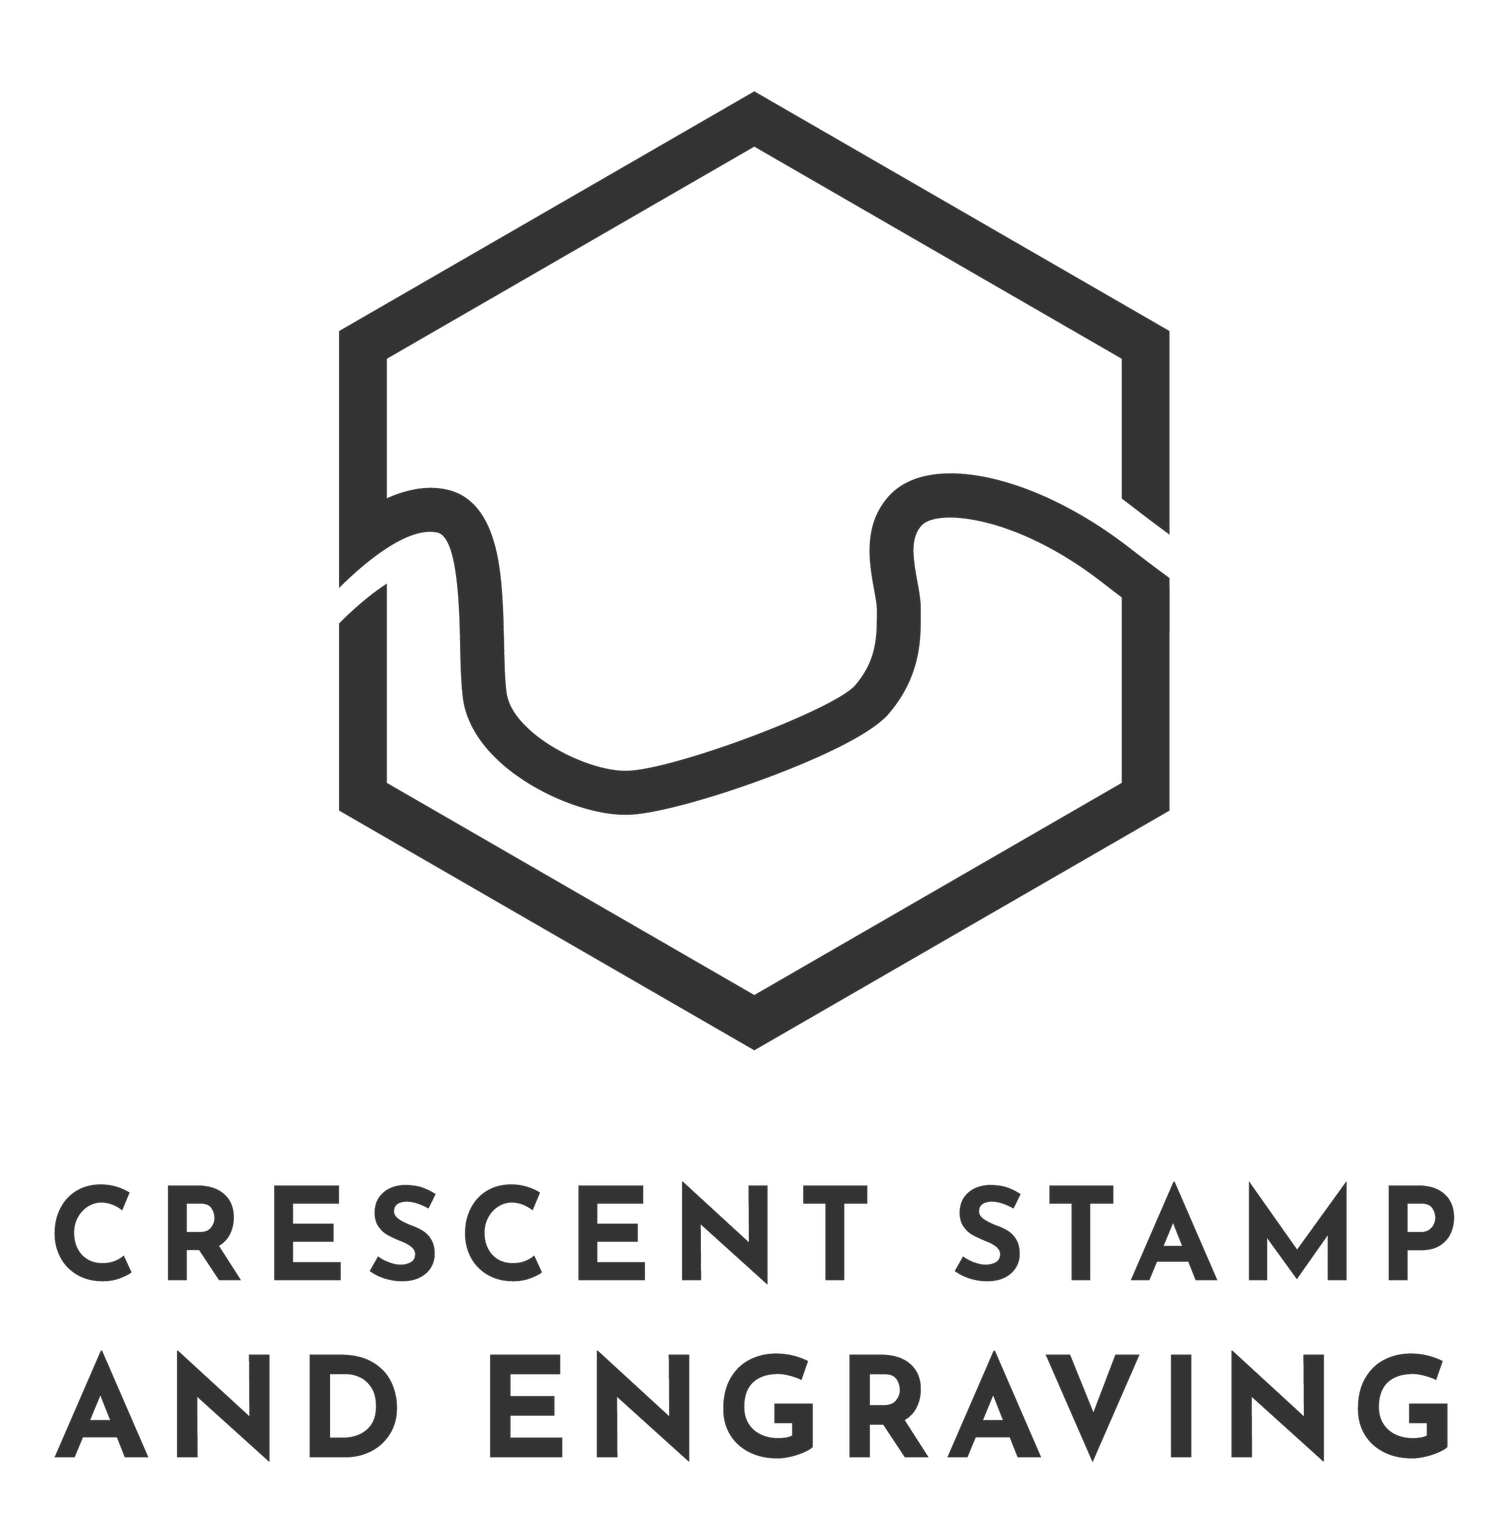 Crescent Stamp and Engraving